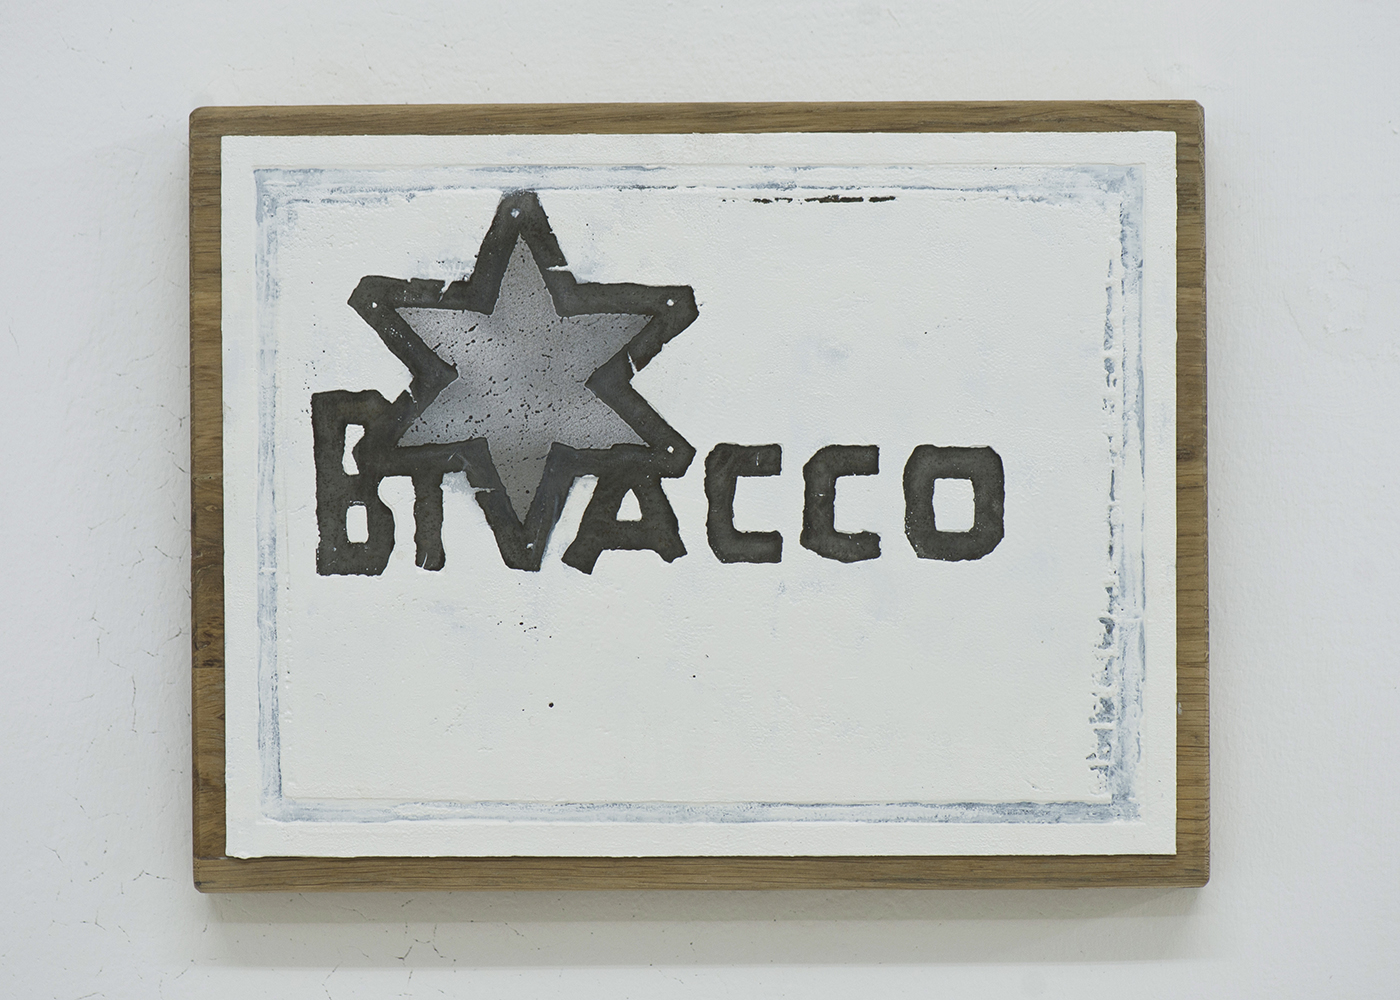 Bivacco | Star 2011 (Sculptural intervention, video and objects)